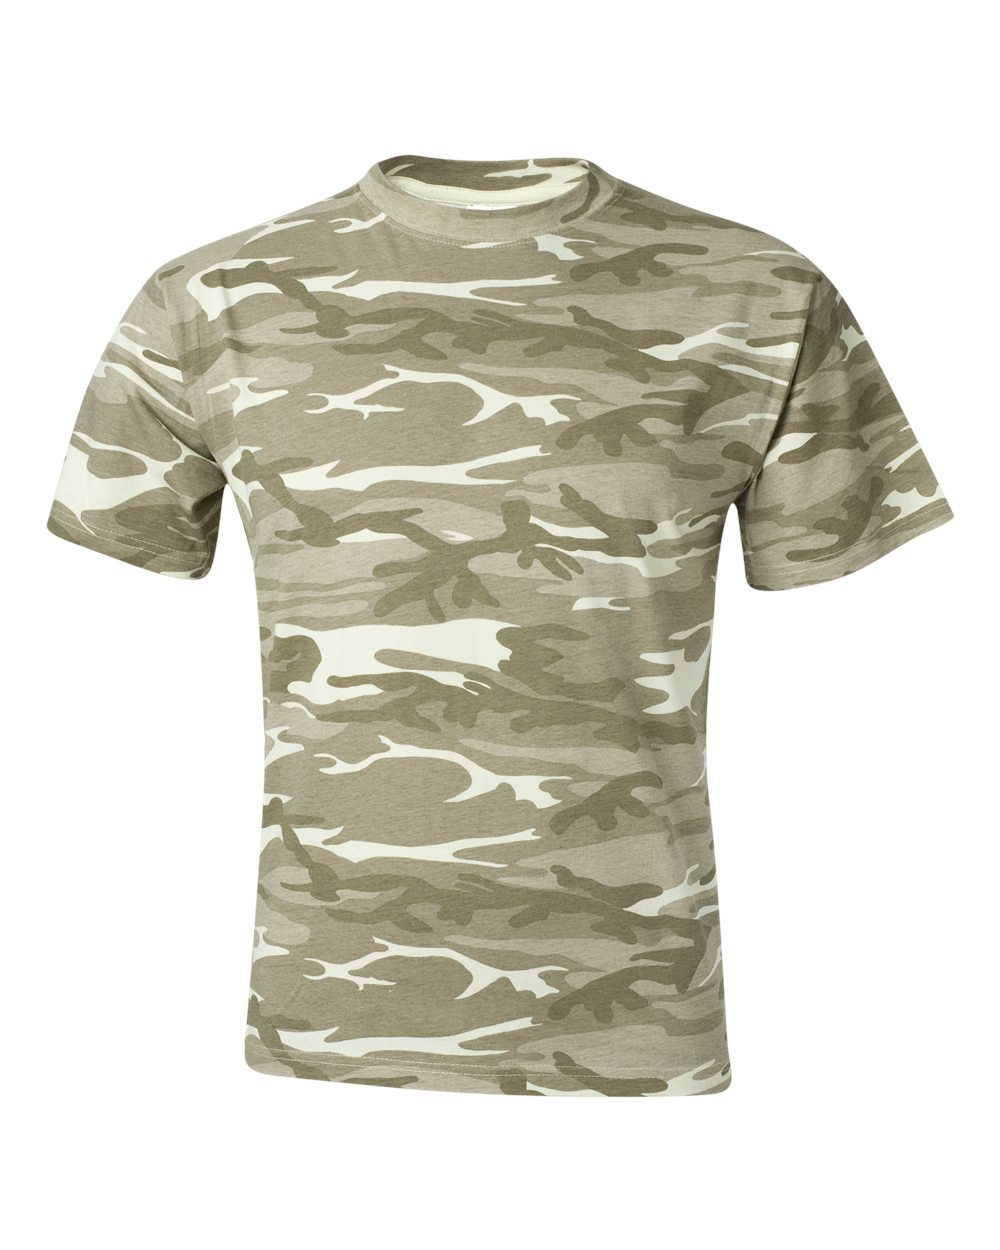 Midweight Camouflage T-Shirt - 939-Anvil